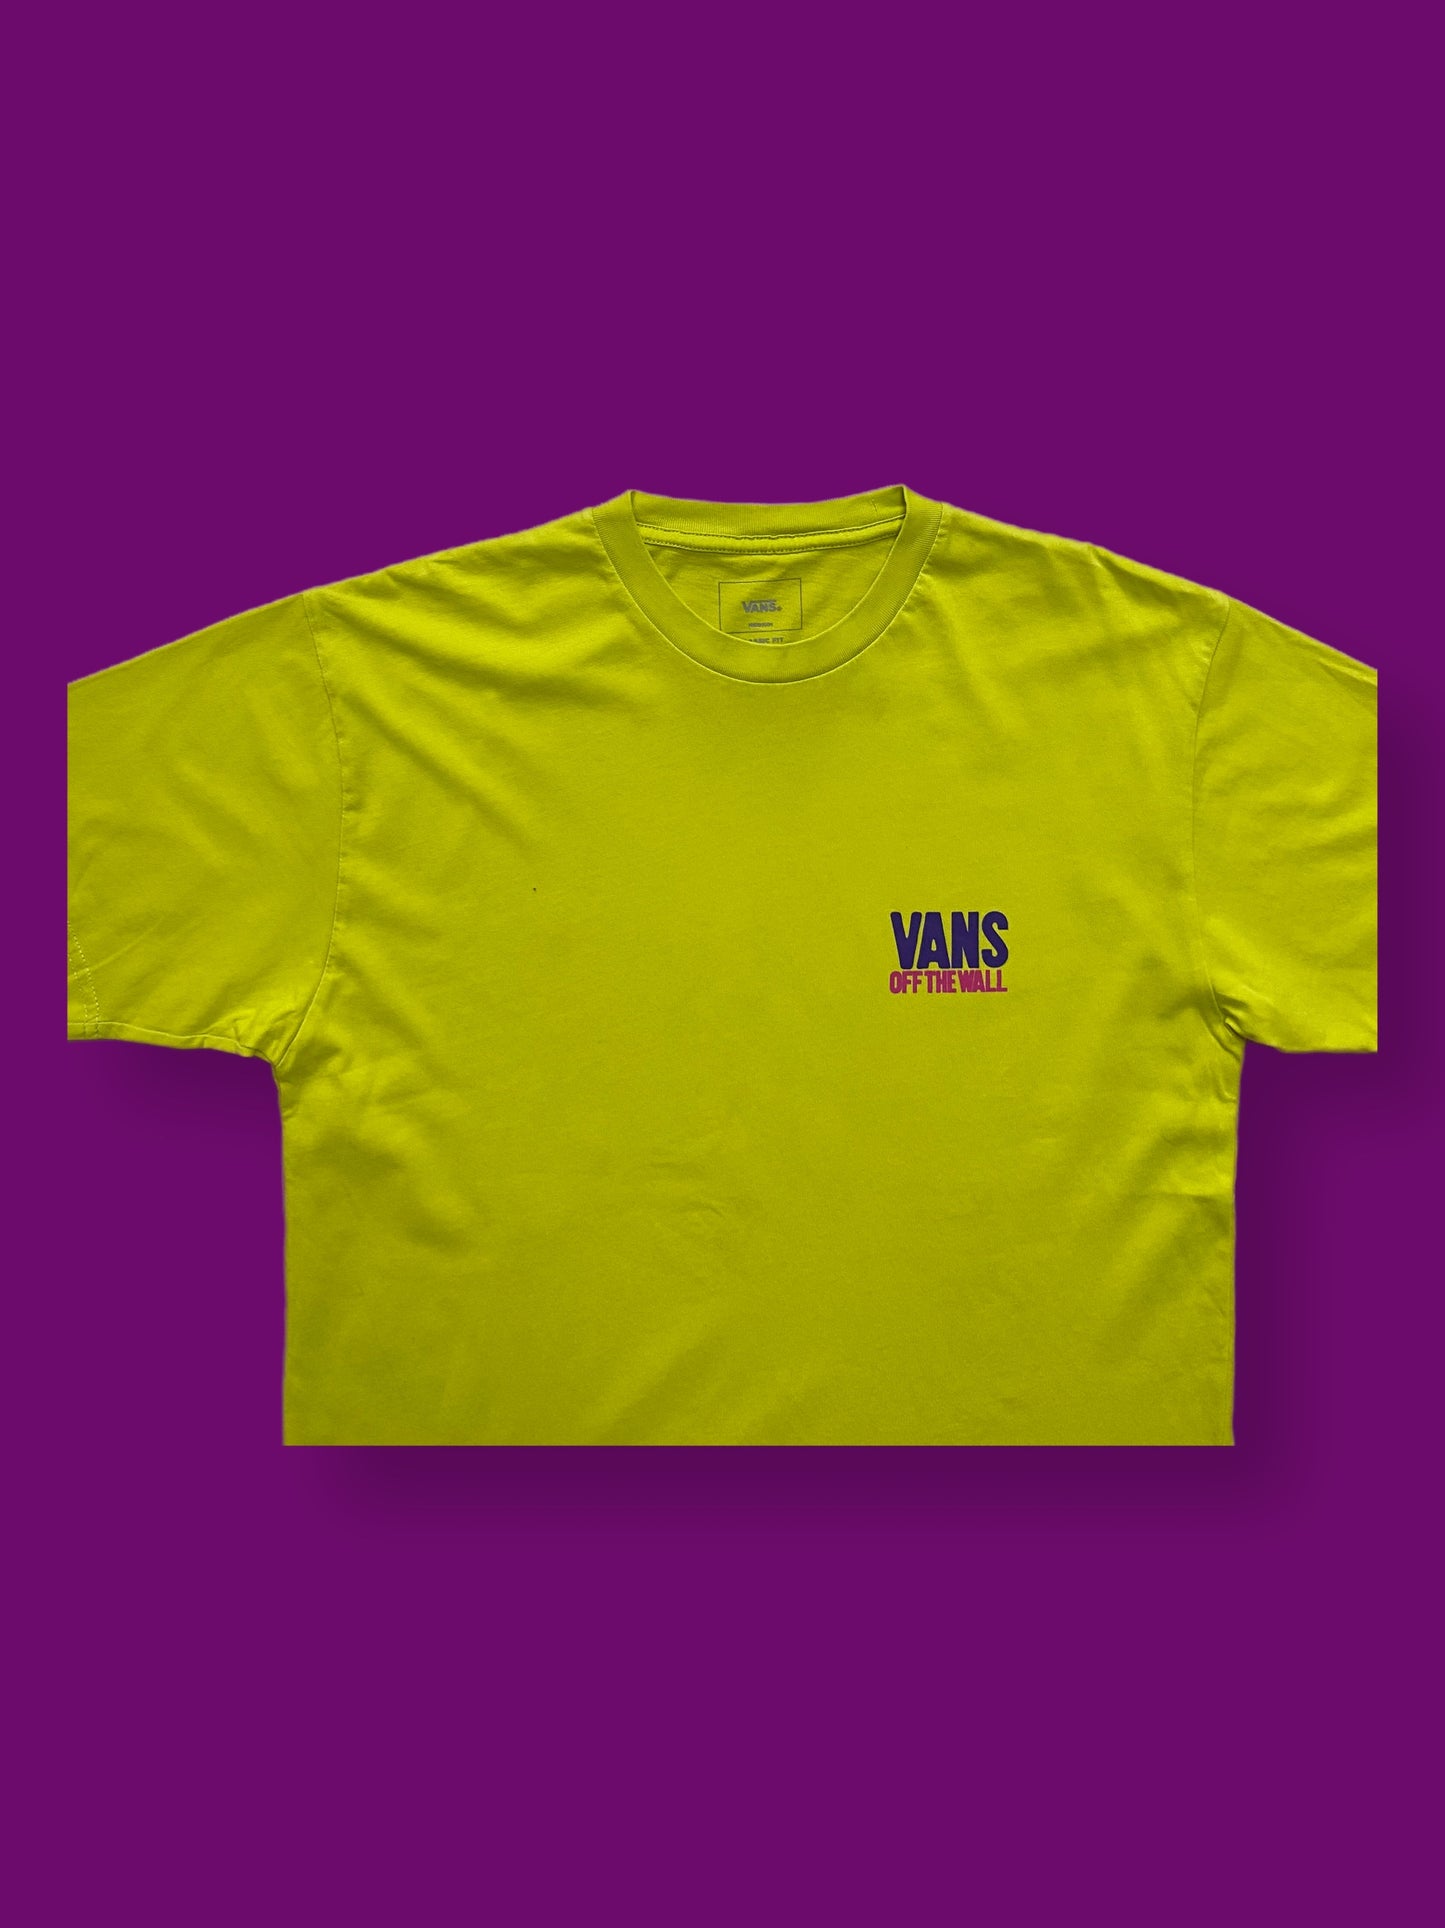 Vans of The Wall T-Shirt